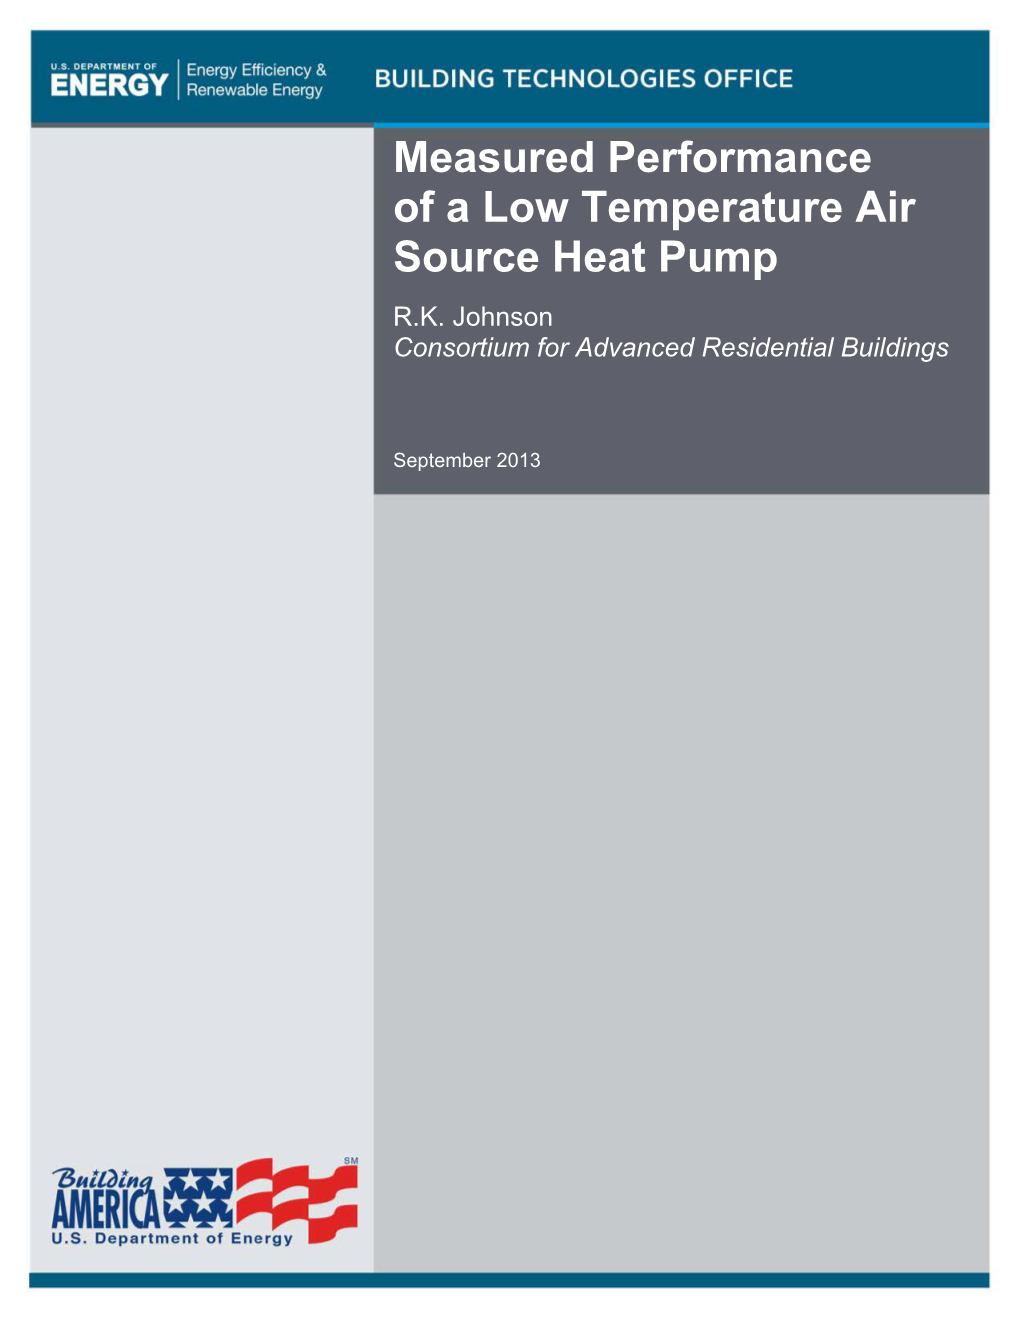 Measured Performance of a Low Temperature Air Source Heat Pump